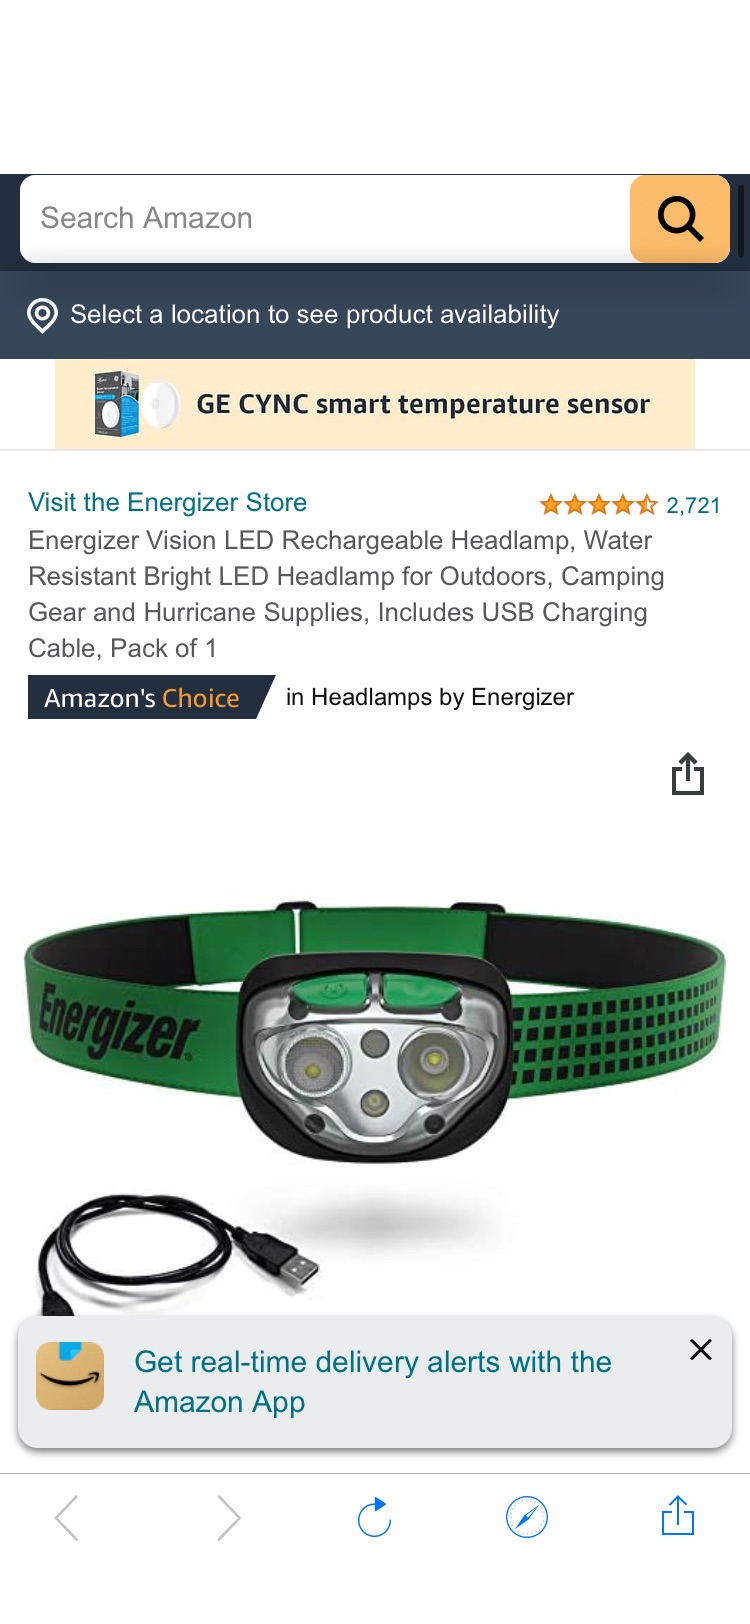 Energizer Vision LED Rechargeable Headlamp